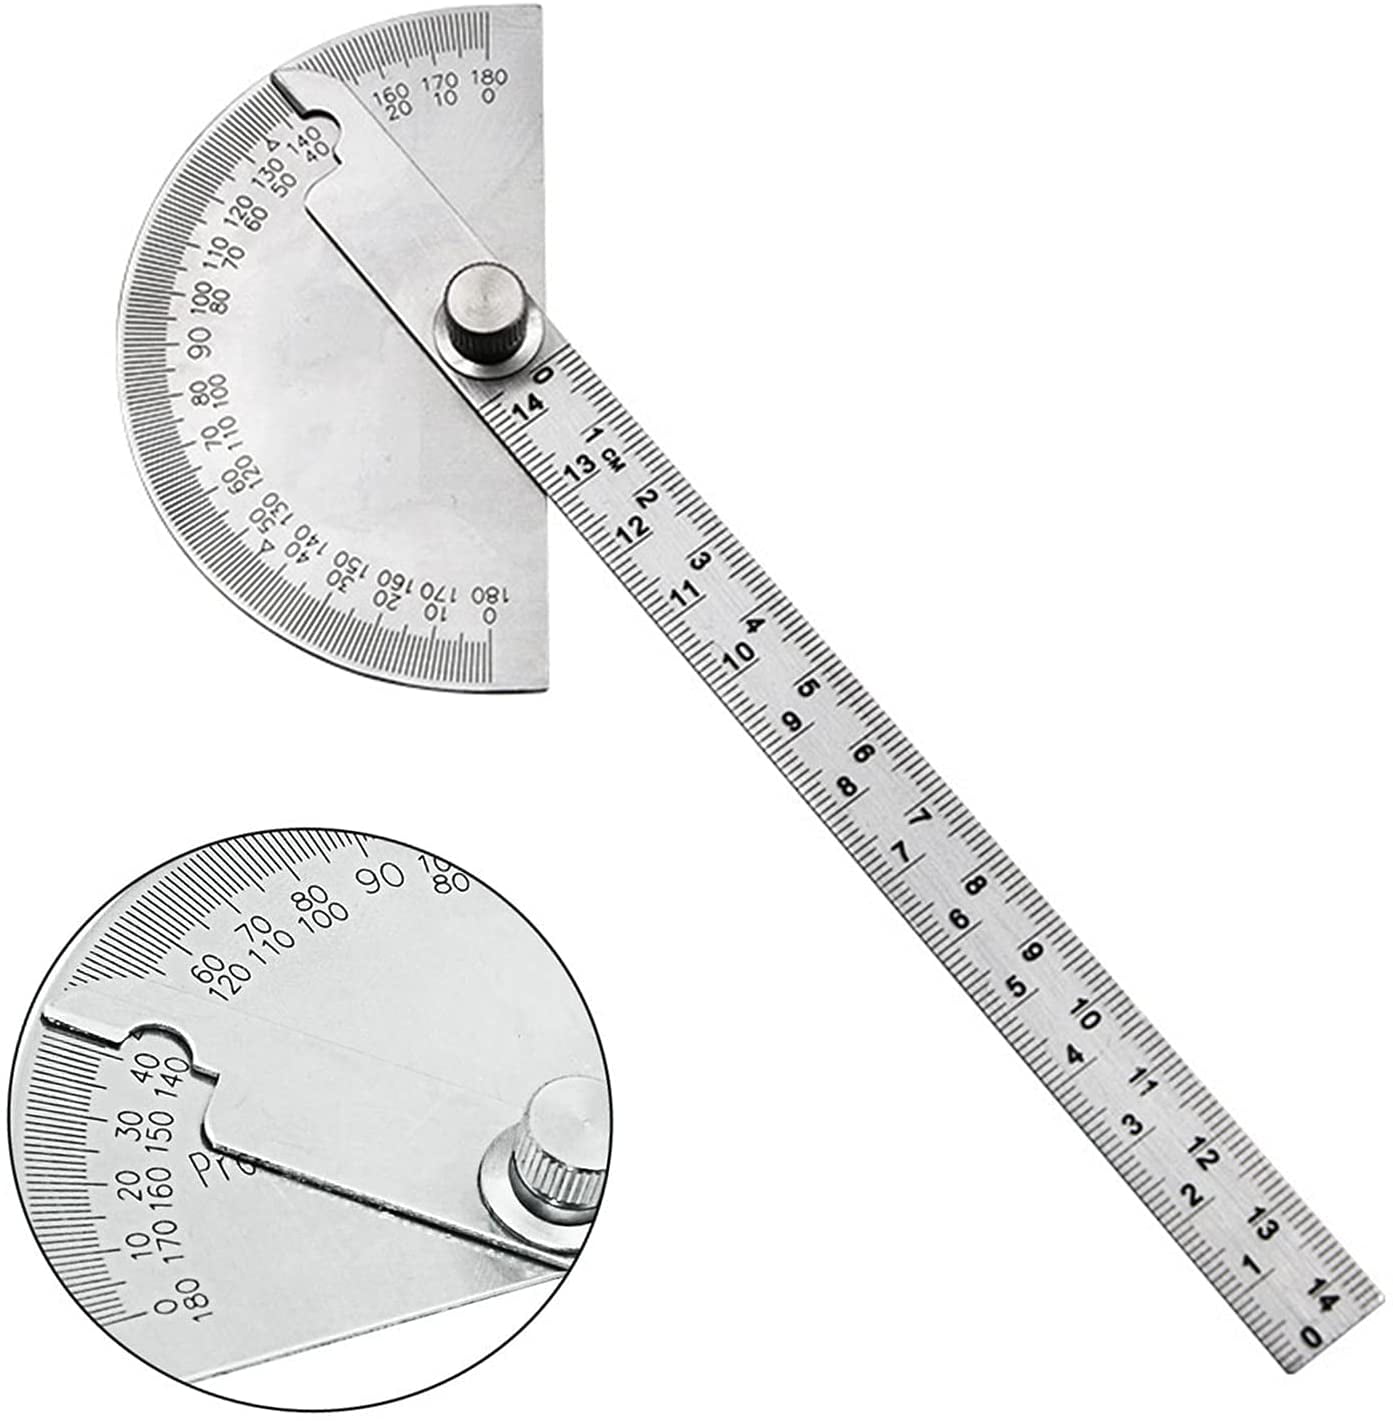 6-Inch Arm 0 to 180 Degrees Round Head Stainless Steel Angle Protractor 